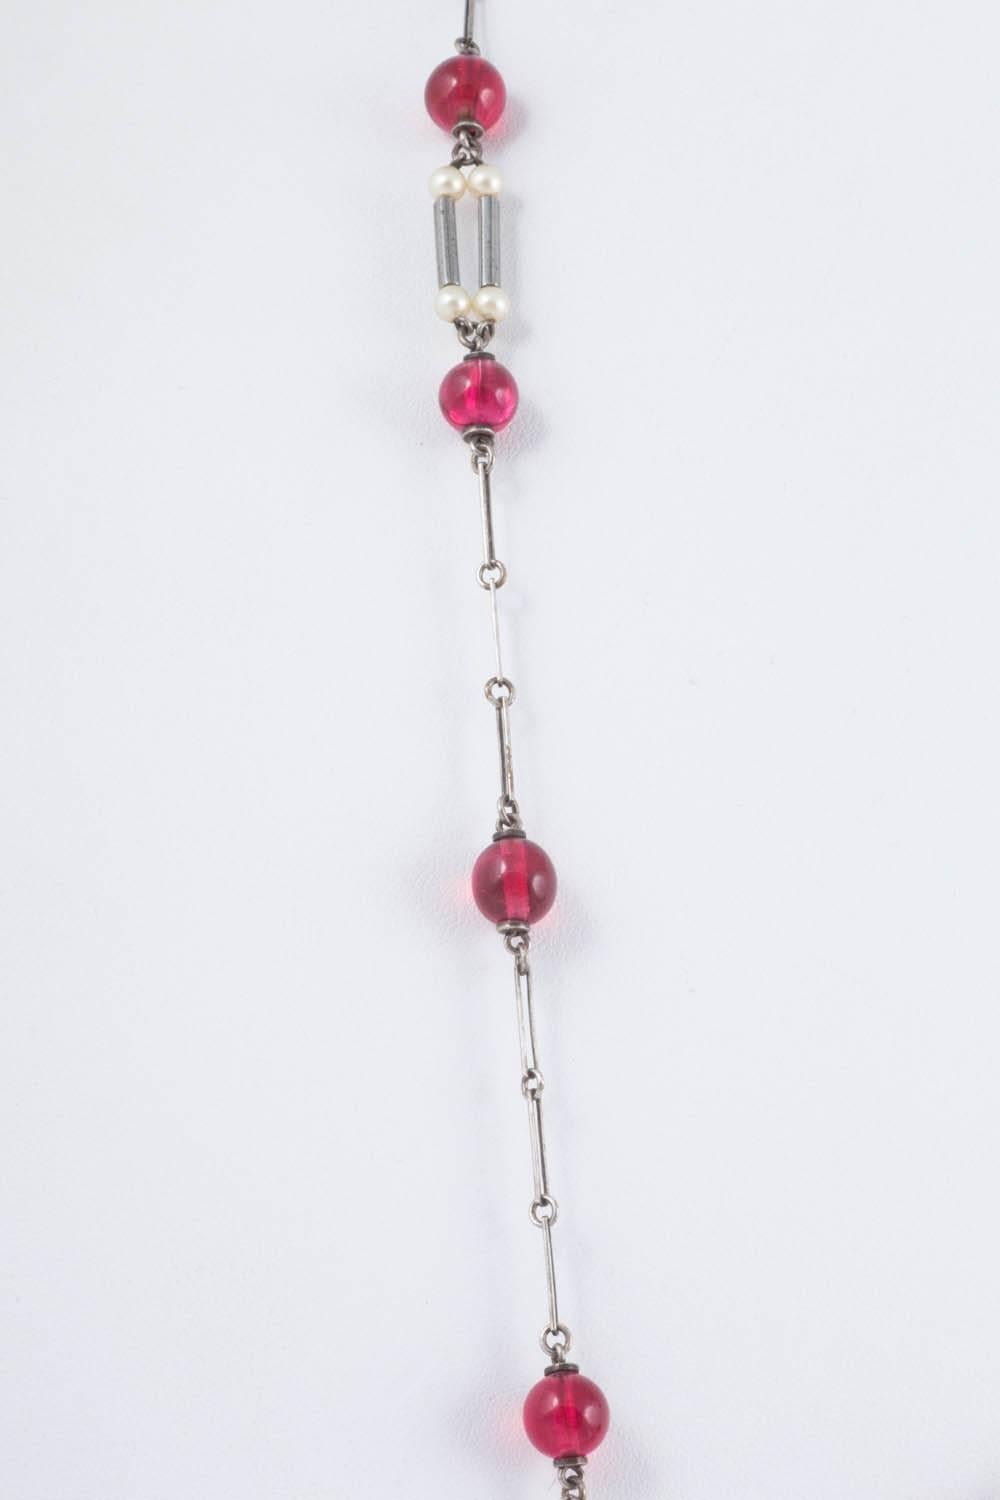 Women's Art Deco cranberry glass and pearl sautoir, with unmarked silver links. 